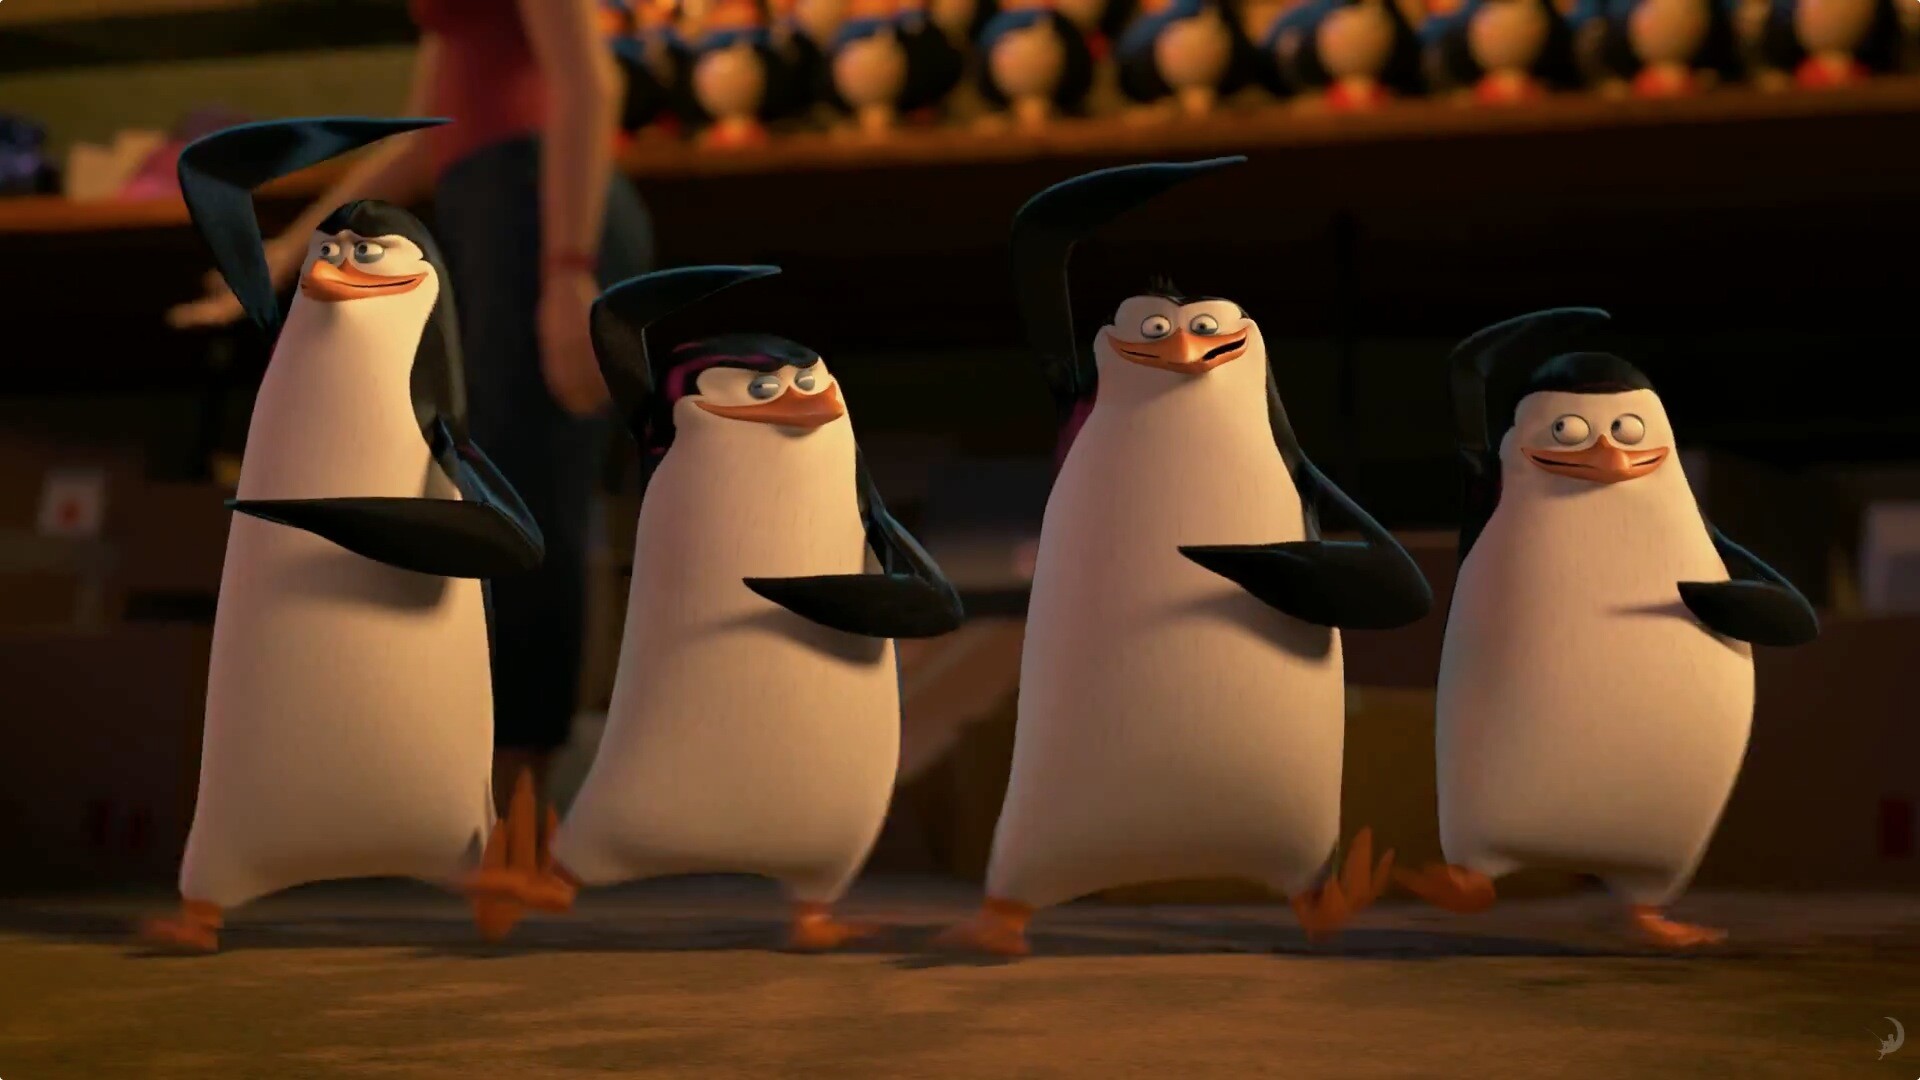 Madagascar (Movie): The show follows the adventures of the penguins, Produced by DreamWorks Animation. 1920x1080 Full HD Background.